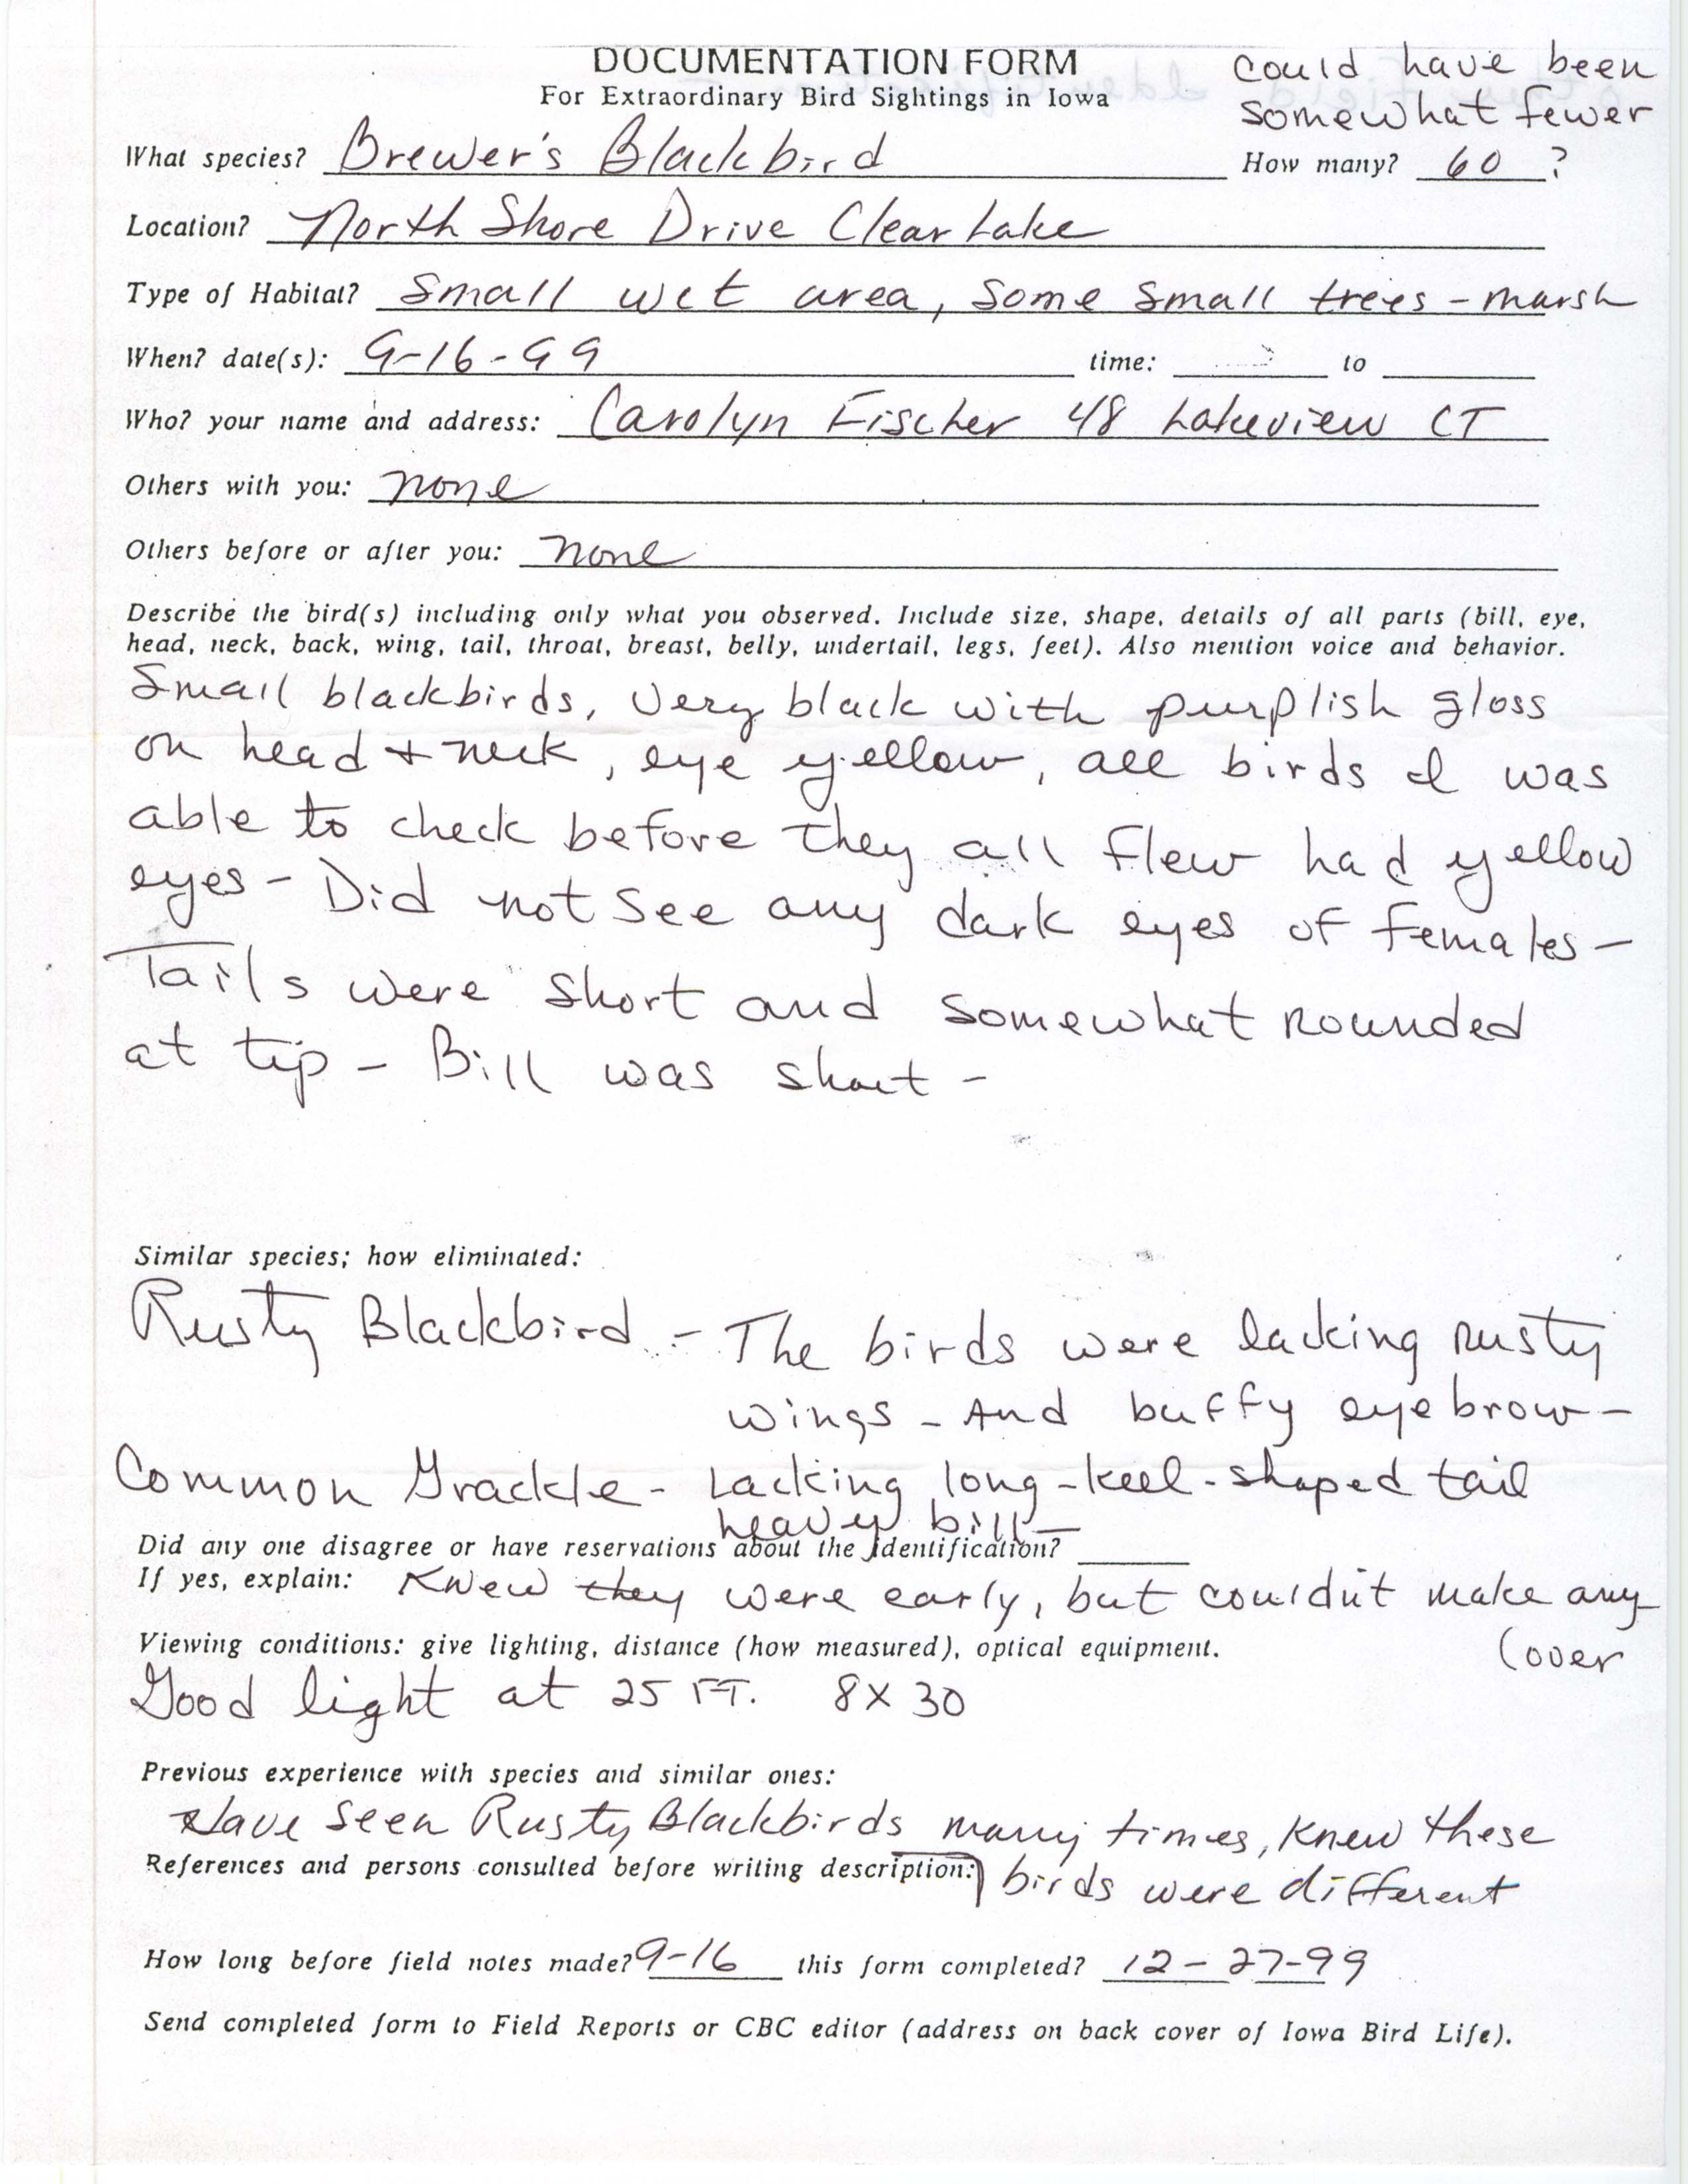 Rare bird documentation form for Brewer's Blackbird at Clear Lake, 1999